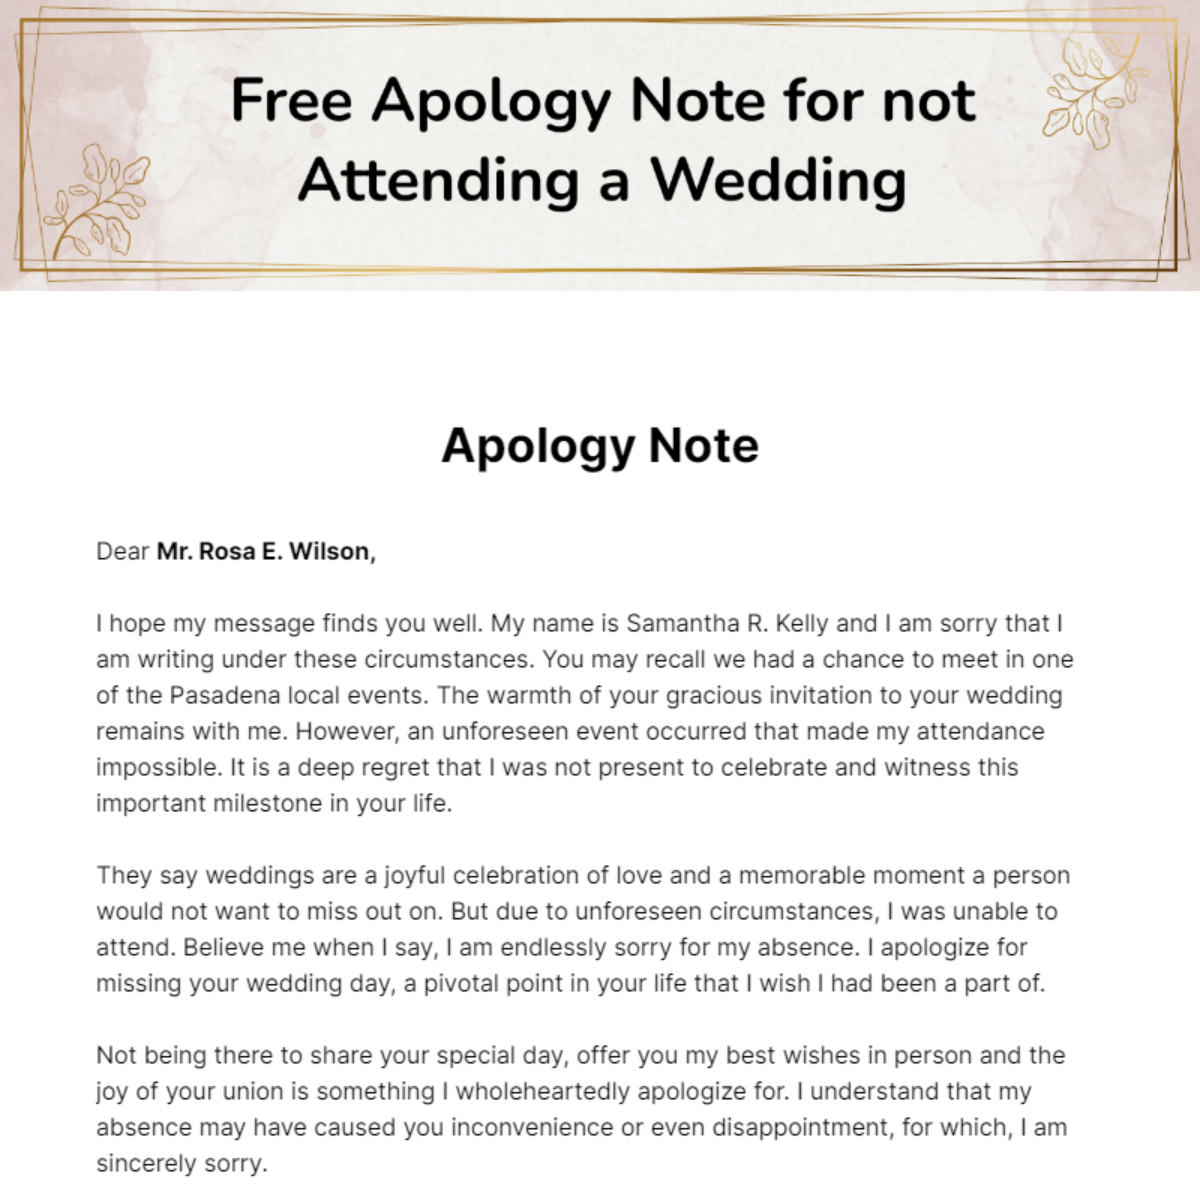 Apology Note for not Attending a Wedding Template